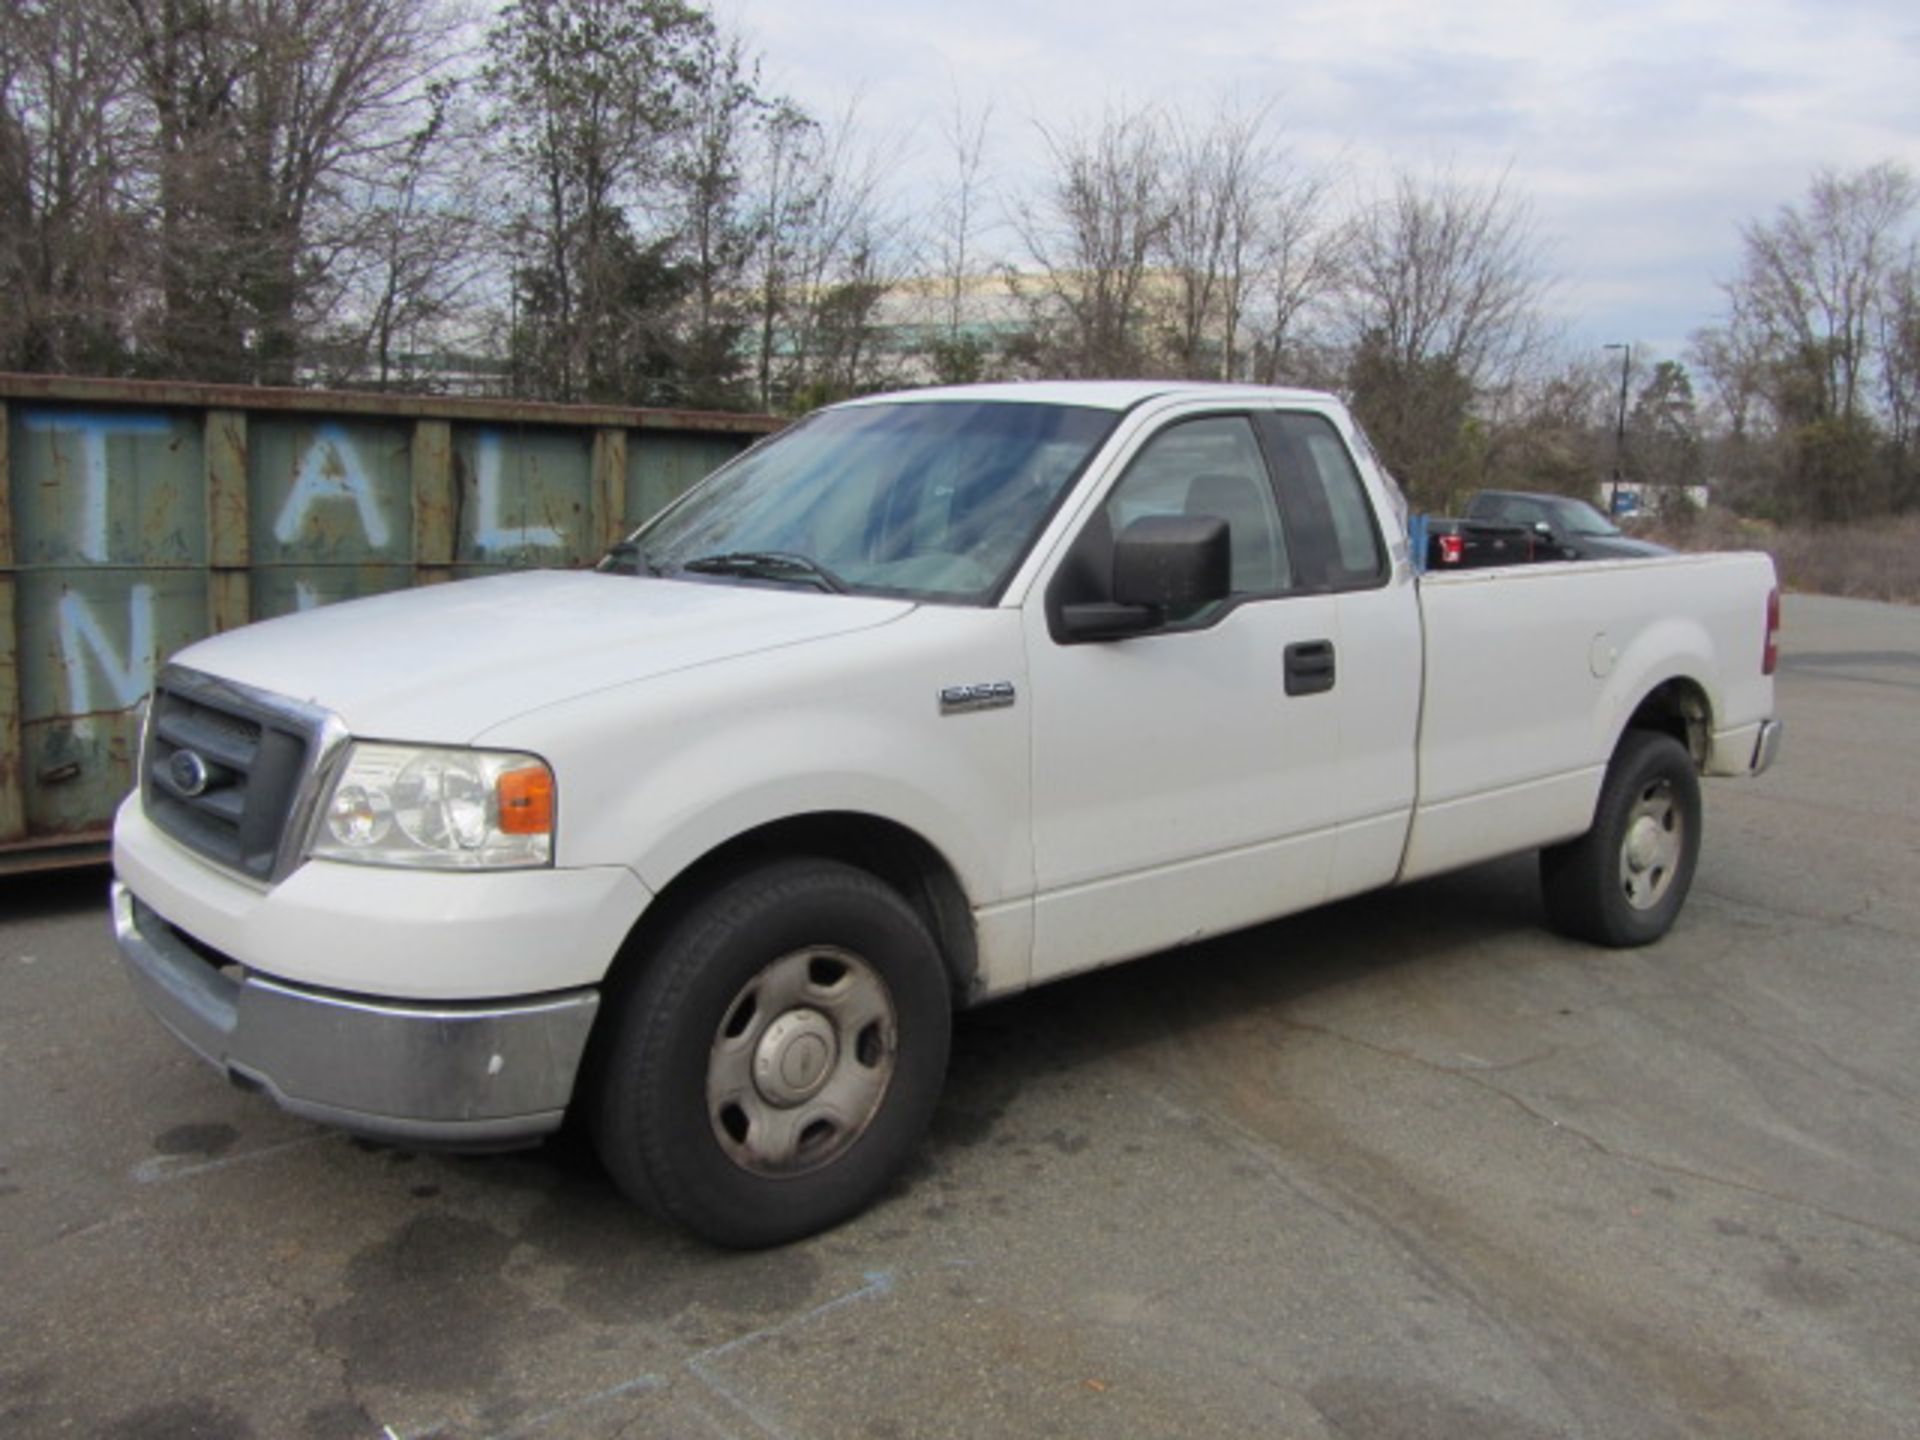 Ford F-150 XLT Triton Pick-Up Truck with 8' Bed, Automatic Transmission, AC & Heat, vin: